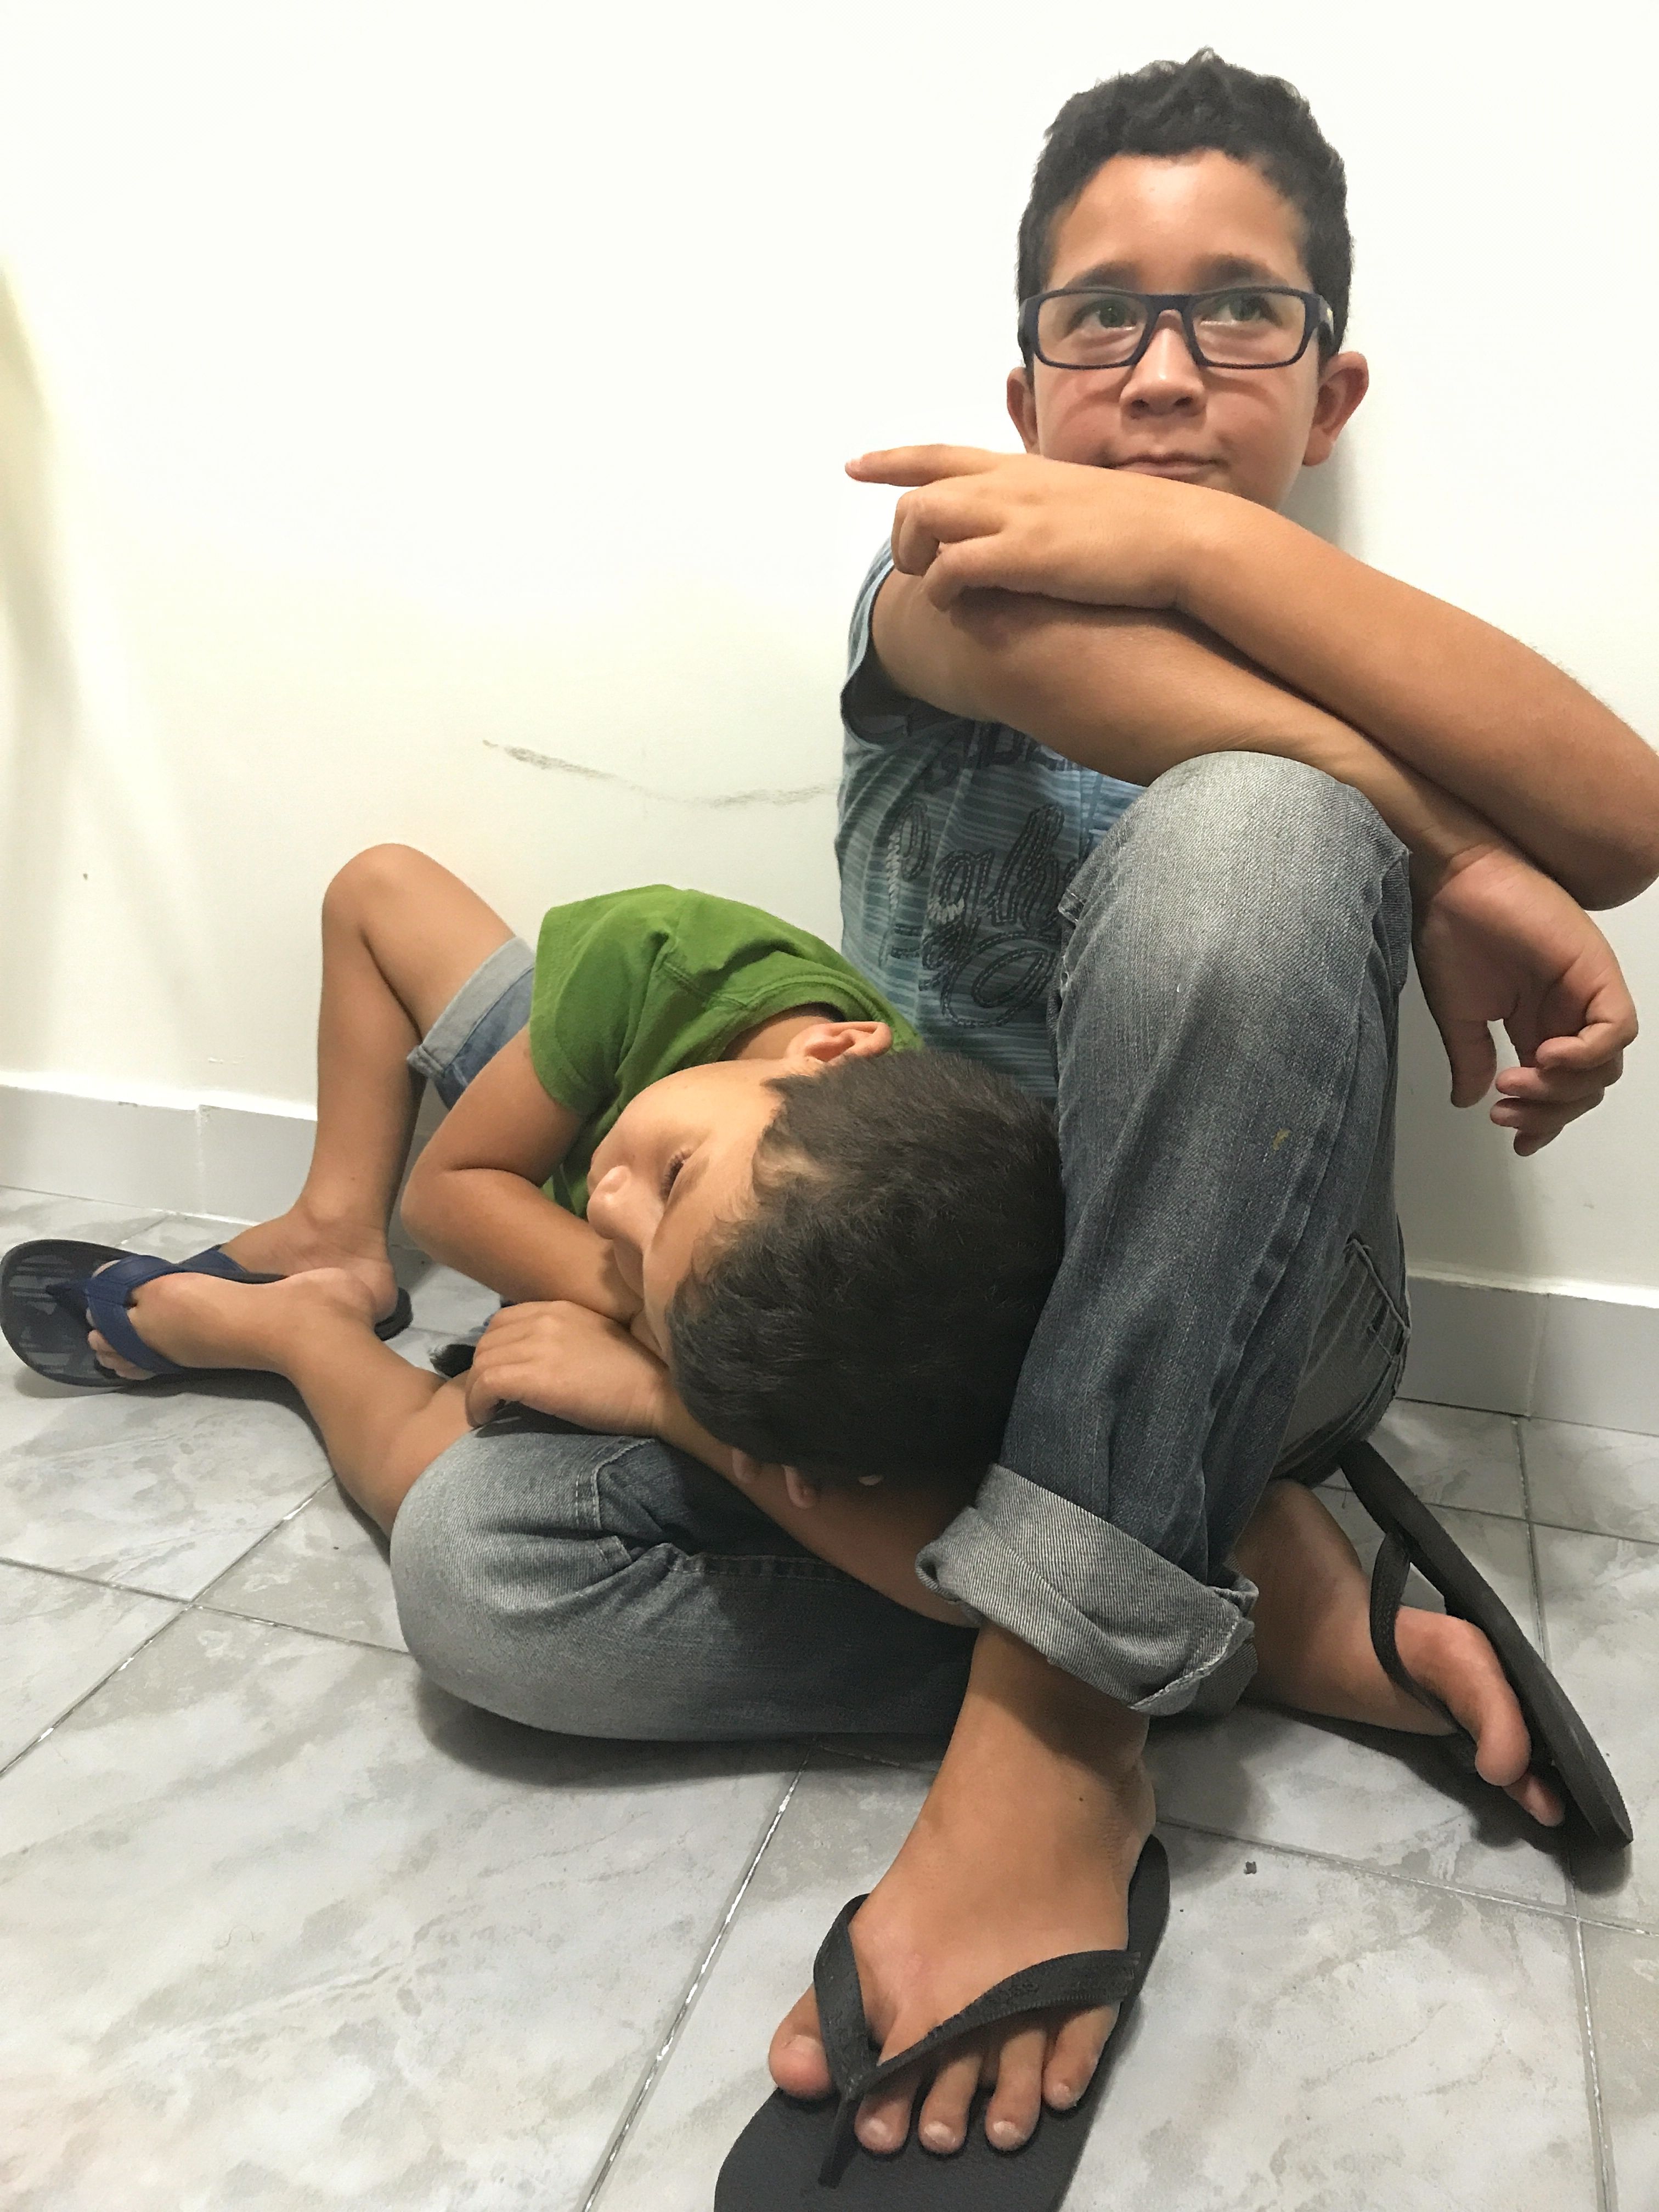 Jorge, 6, lays on his older brother’s lap while they wait for Gilberto to finish his physical therapy appointment at the IPESQ clinic. Dr. Adriana Melo, an obstetrician who rose to national prominence in 2015 after being the first person to isolate the Zika virus in the amniotic fluid of pregnant patients, tells me that “last week when Jorge came to the clinic, he said to me, ‘Doctor, I have microcephaly!’ He asked if he could have the same milk and medications as Gilberto. He wants to feel special, too.” Image by Poonam Daryani. Brazil, 2017.